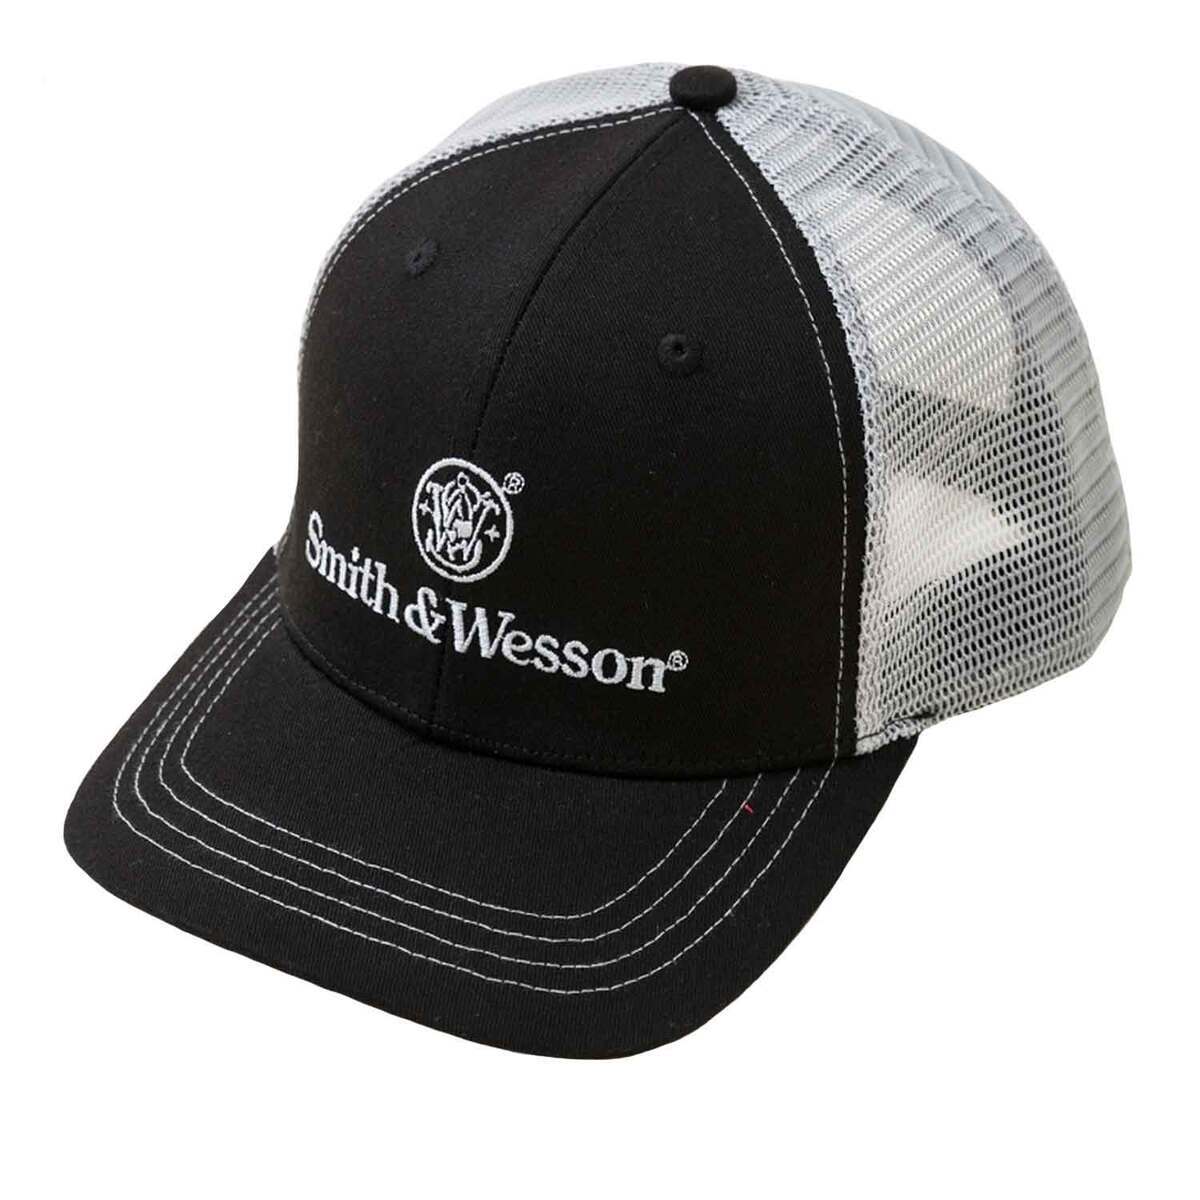 Smith & Wesson Classic Logo Trucker Hat - Black/White - One Size